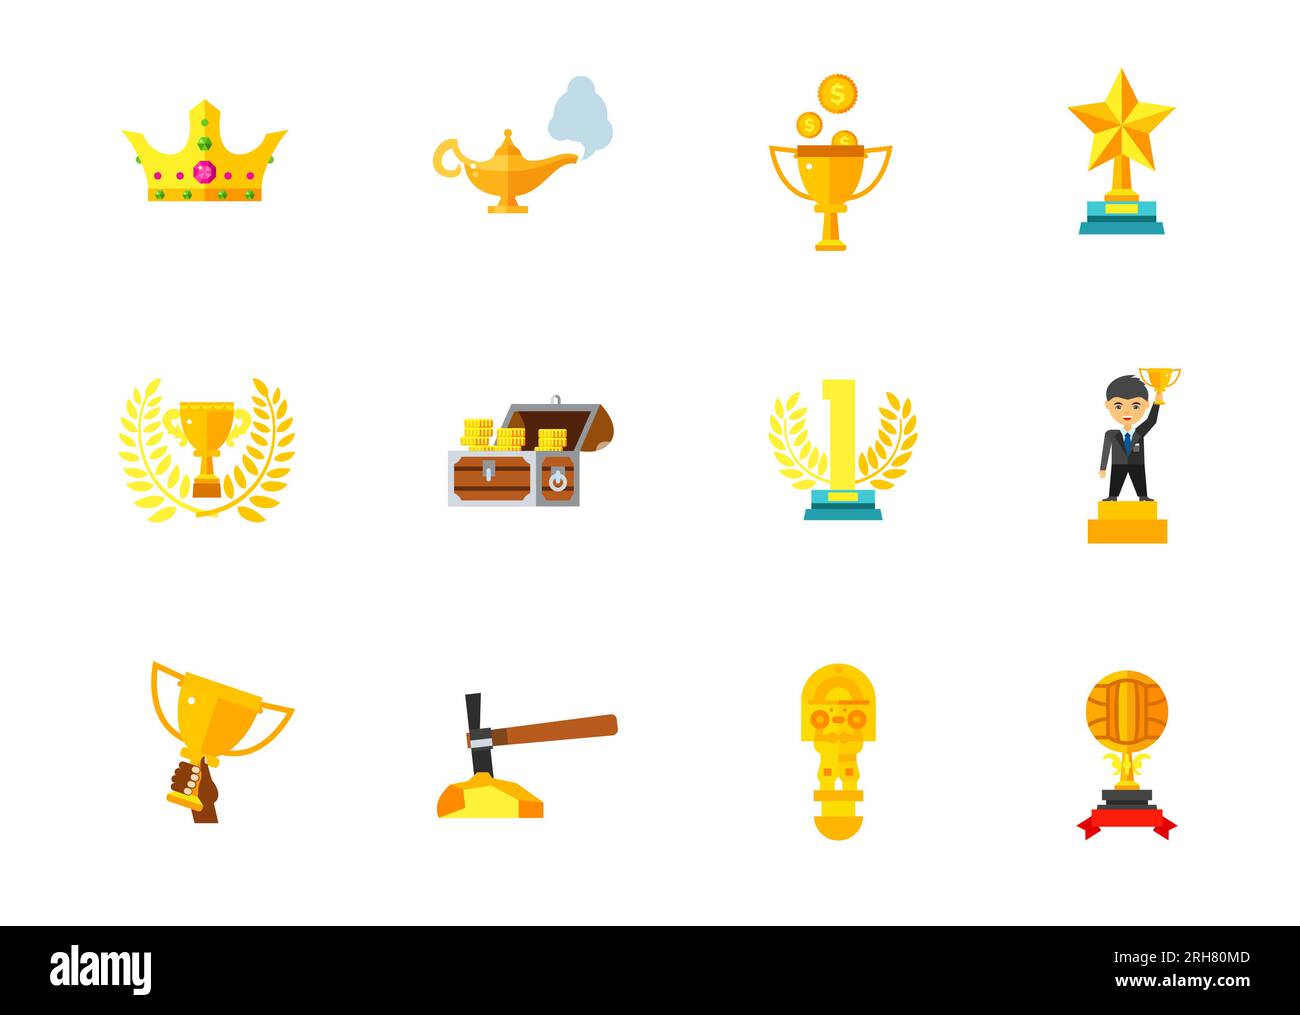 Things made of gold icon set Stock Vector